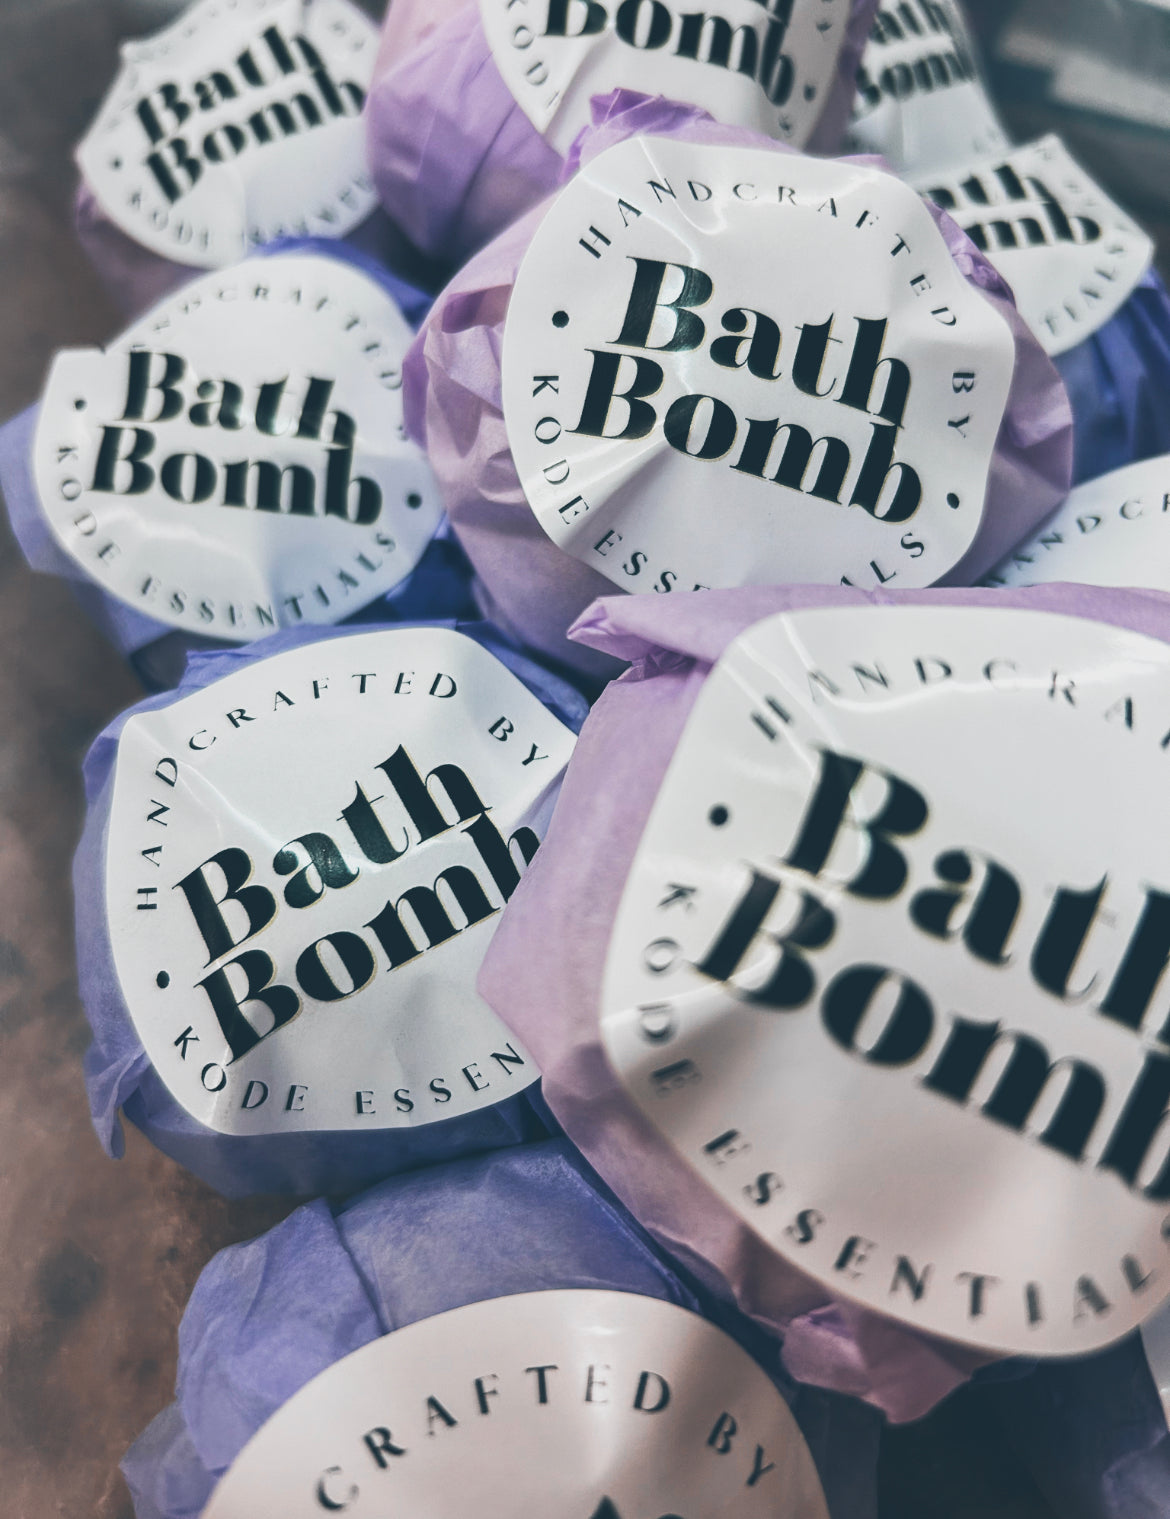 Handcrafted Bath Bombs